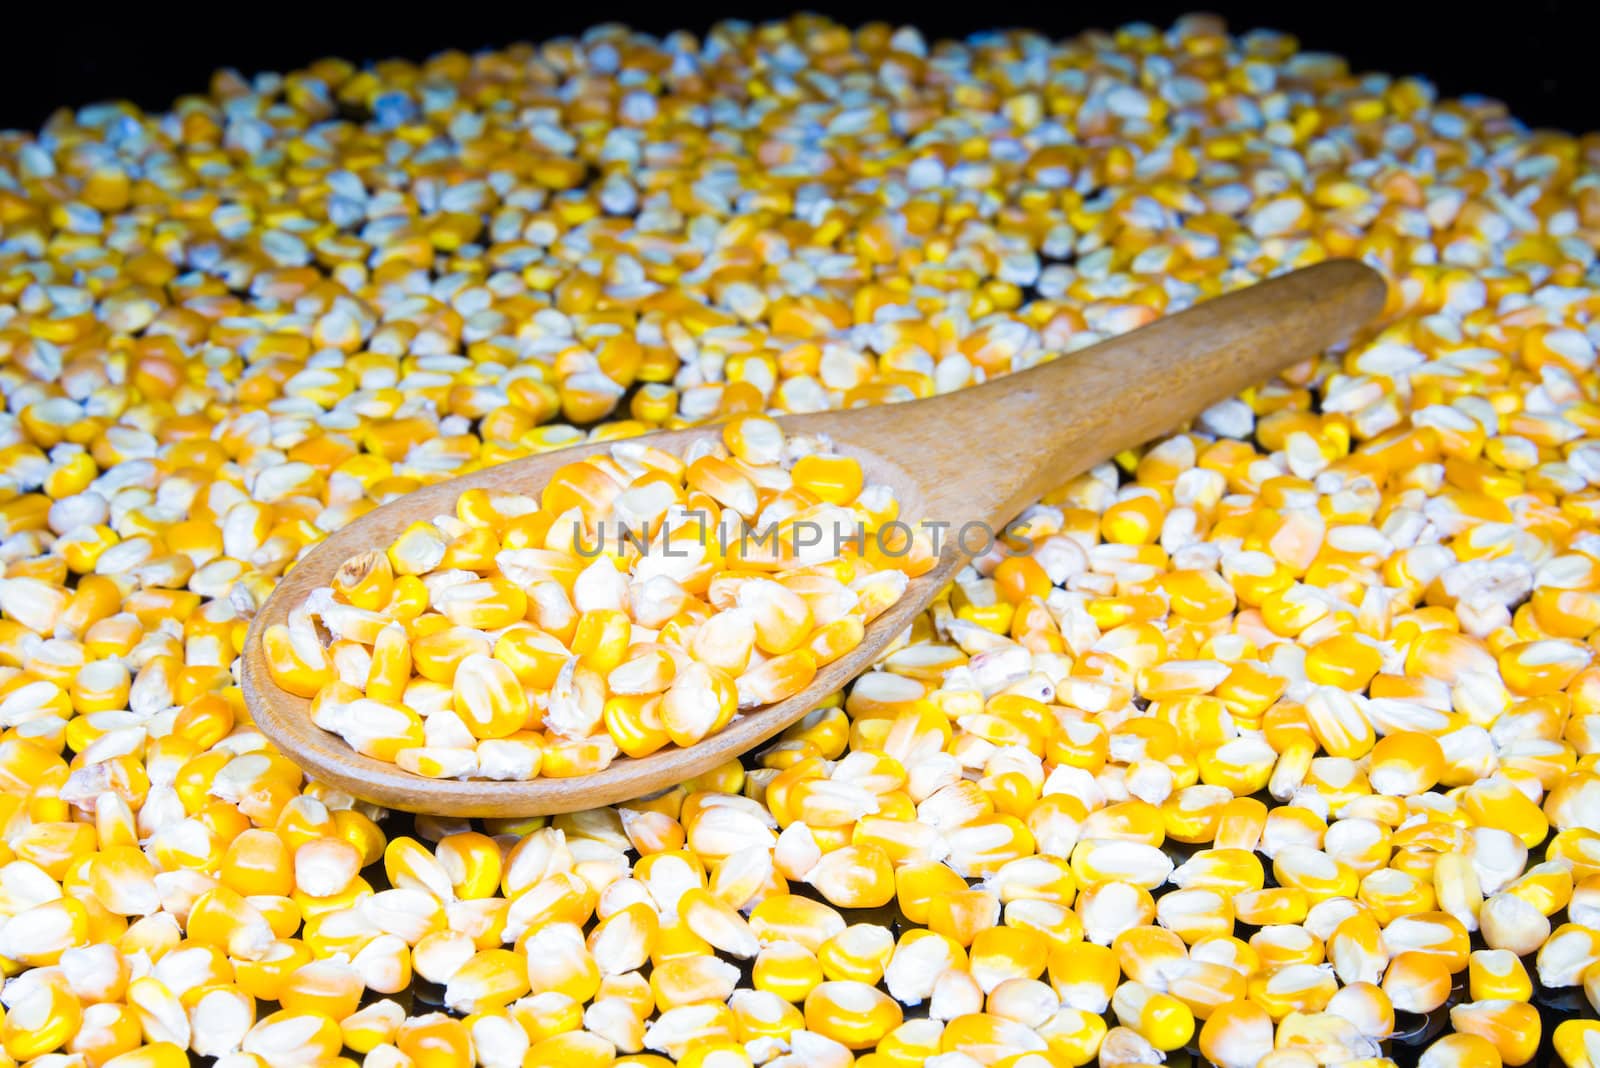 corn seeds in a wooden bowl by wmitrmatr